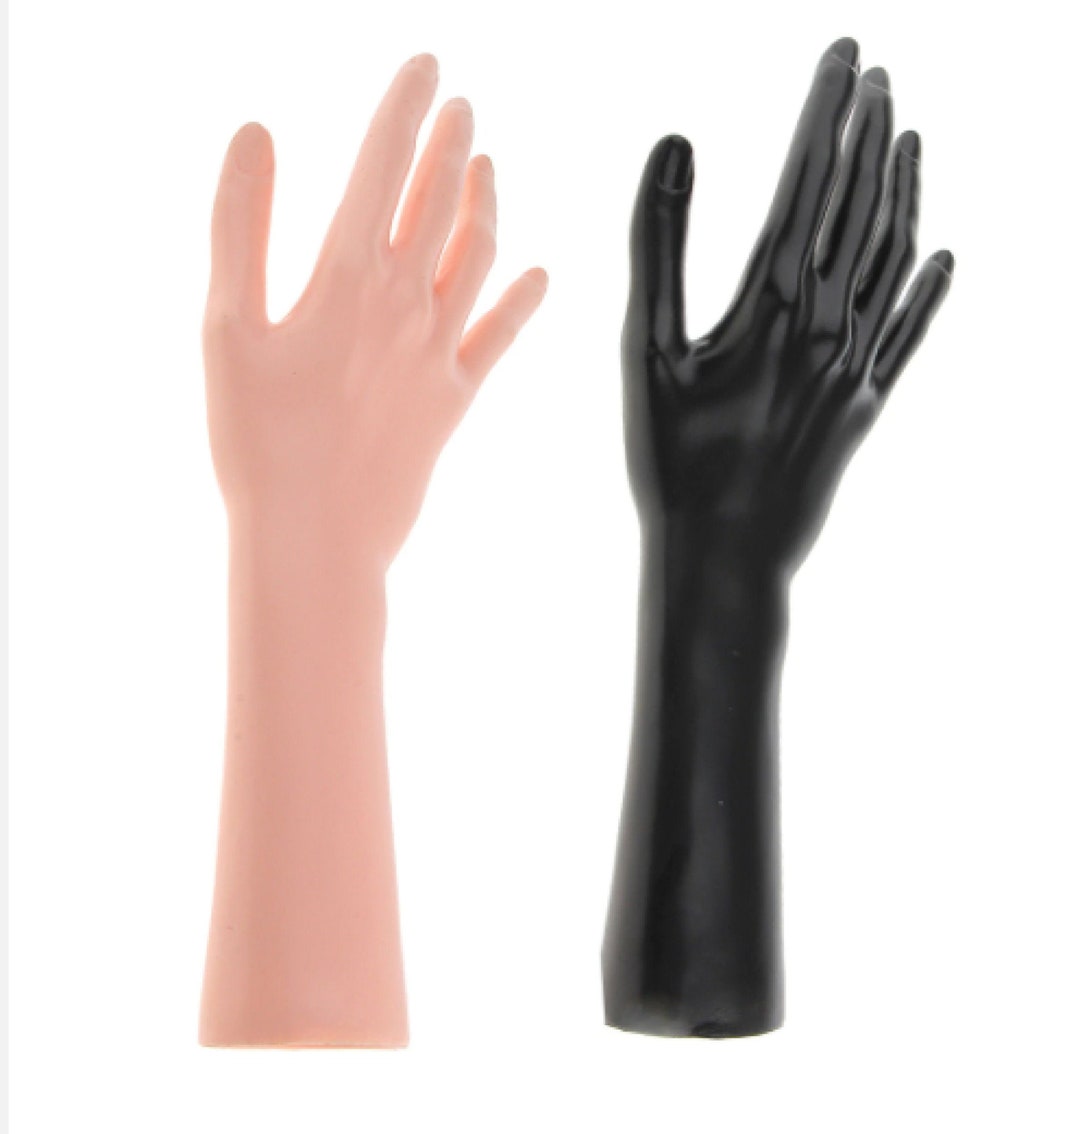 Set of 2 Hand Ring Display With Black Polish, Manequinne Hands